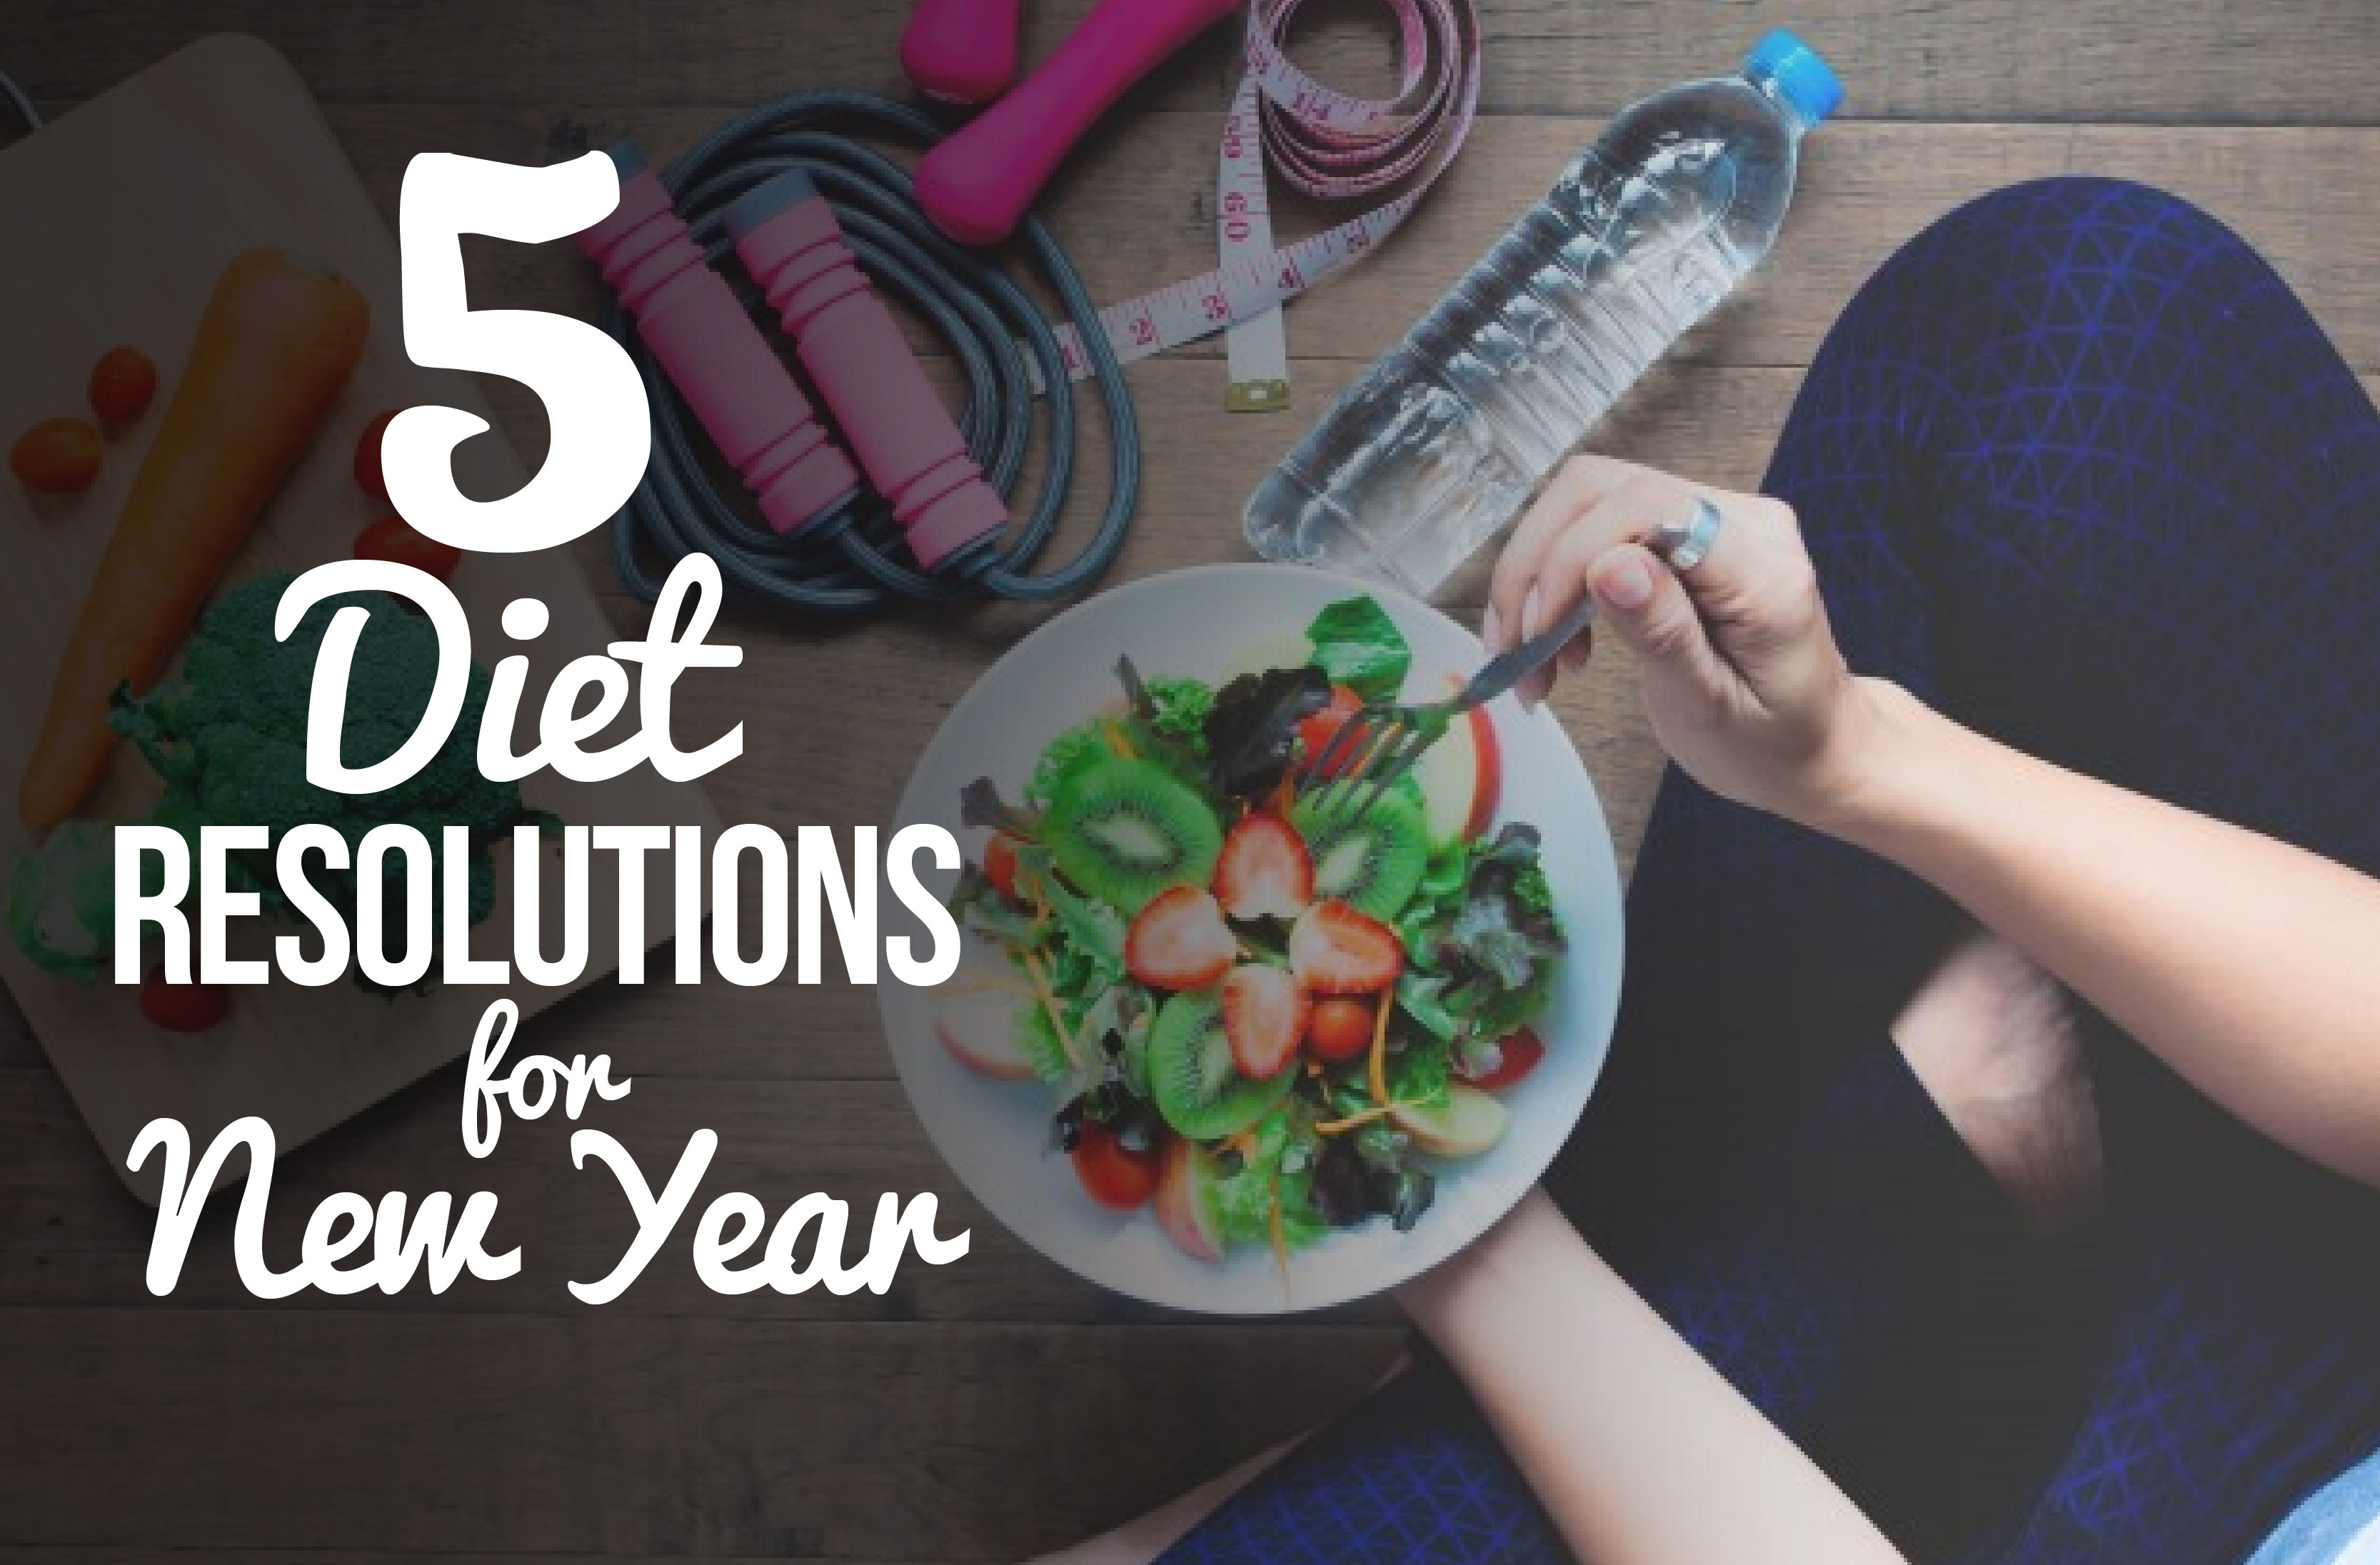 5 Diet Resolutions for New Year